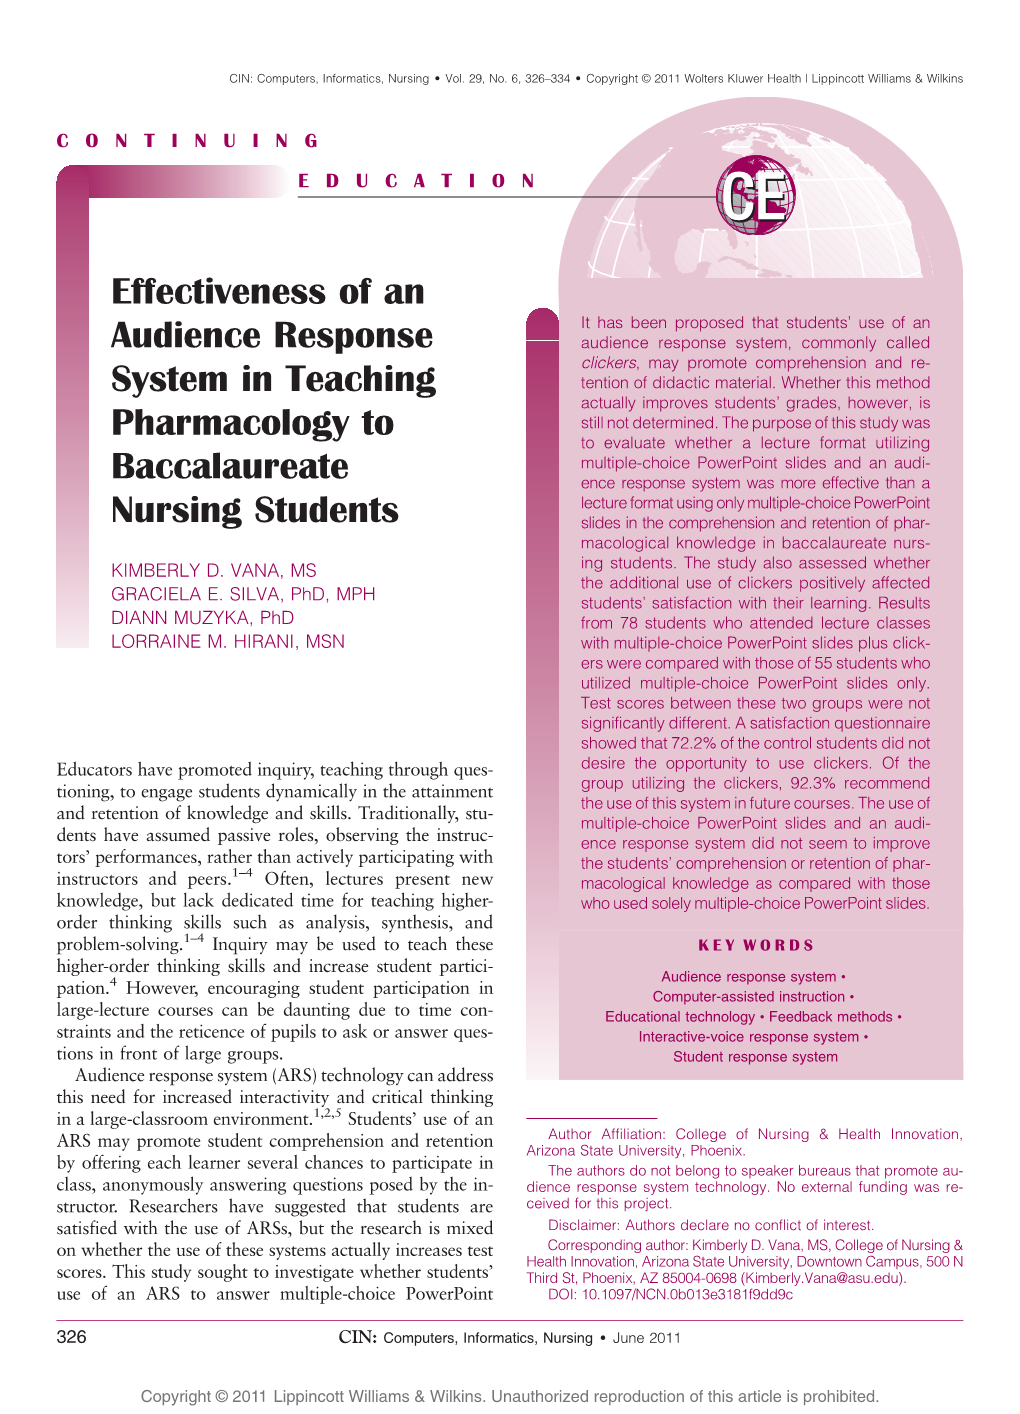 Effectiveness of an Audience Response System in Teaching